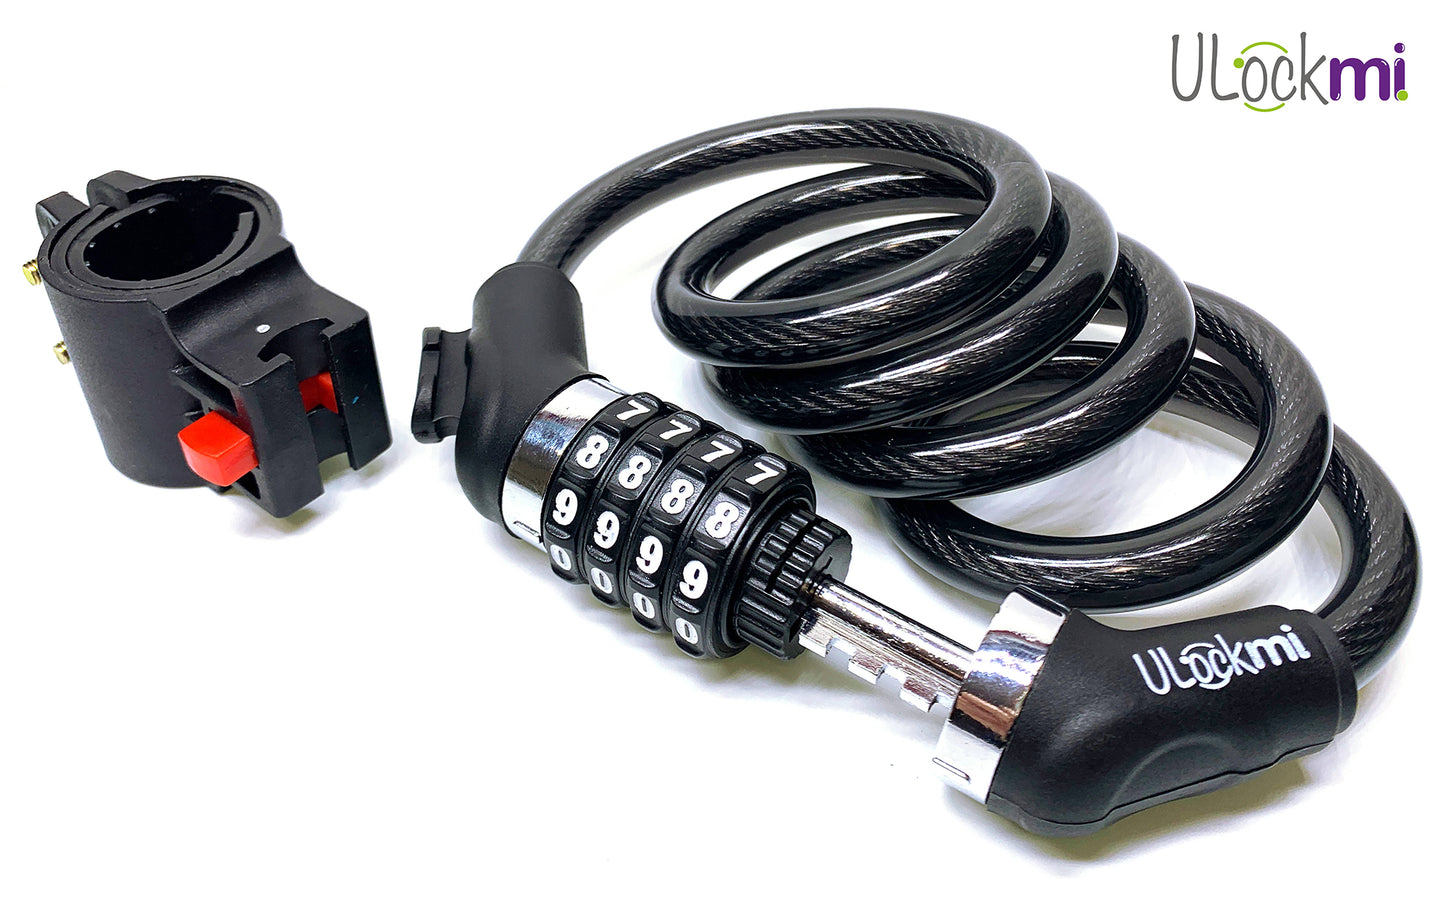 Ulockmi 4D Bike Lock: Secure and versatile. 4-digit combo, 120cm x 12mm cable. Ideal for bikes, scooters, and more.